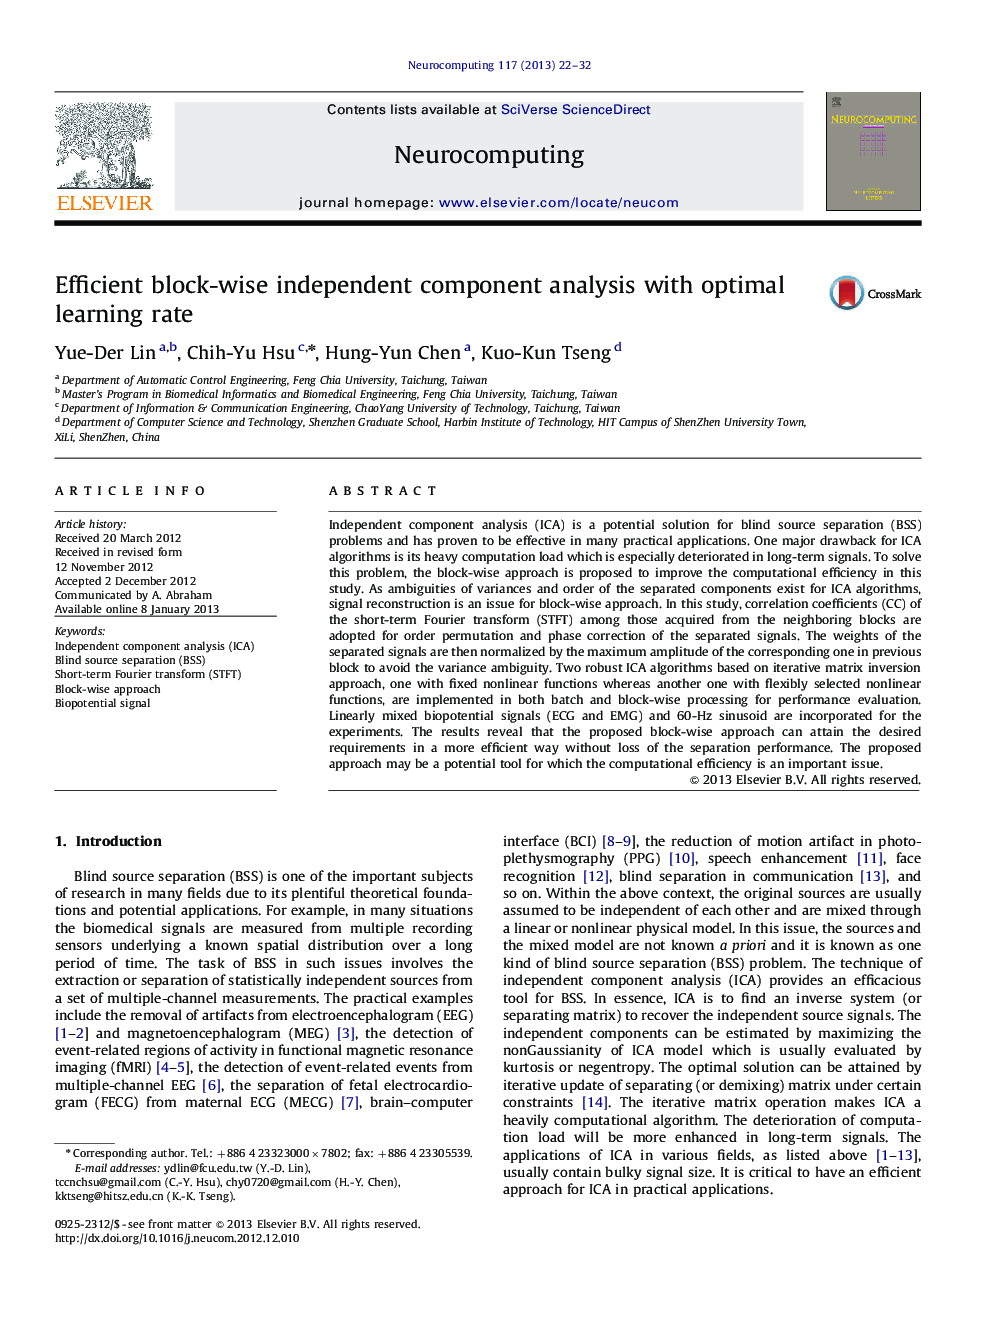 Efficient block-wise independent component analysis with optimal learning rate